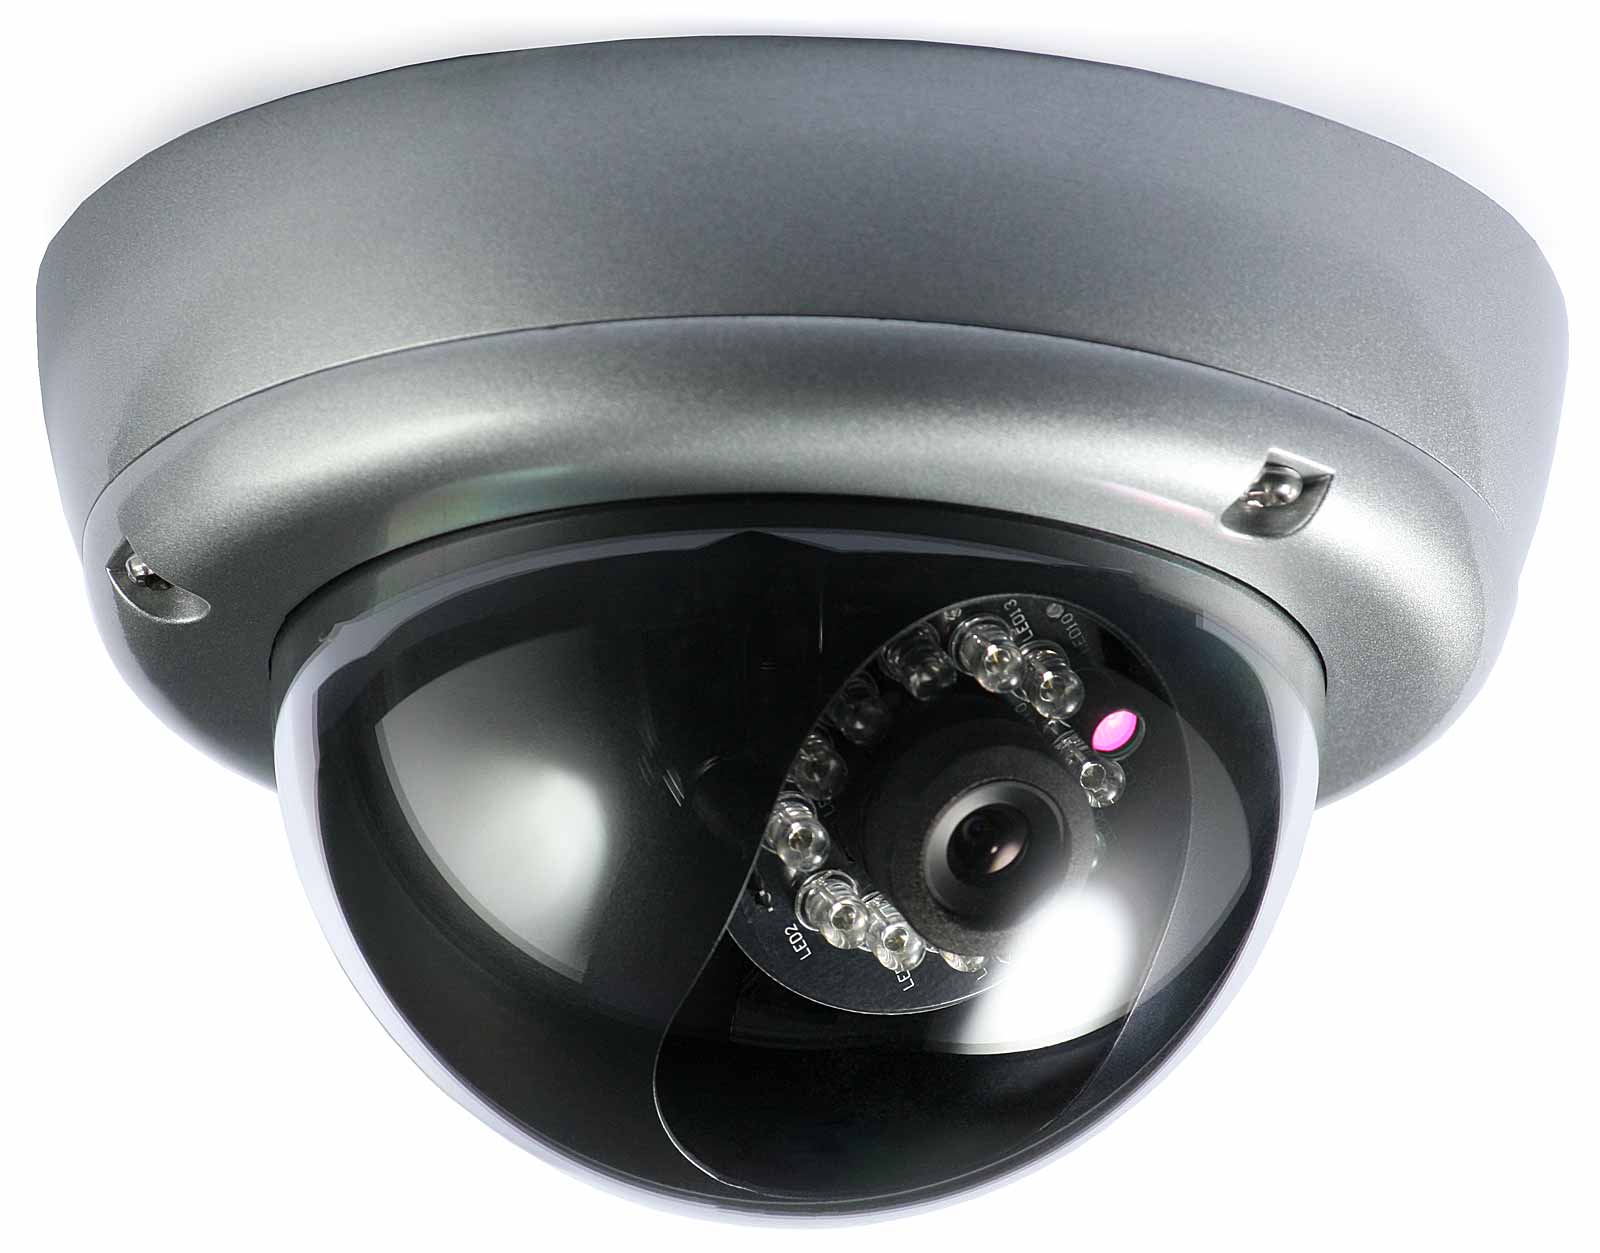 Dome Camera Manufacturer Supplier Wholesale Exporter Importer Buyer Trader Retailer in Faridabad Jharkhand India